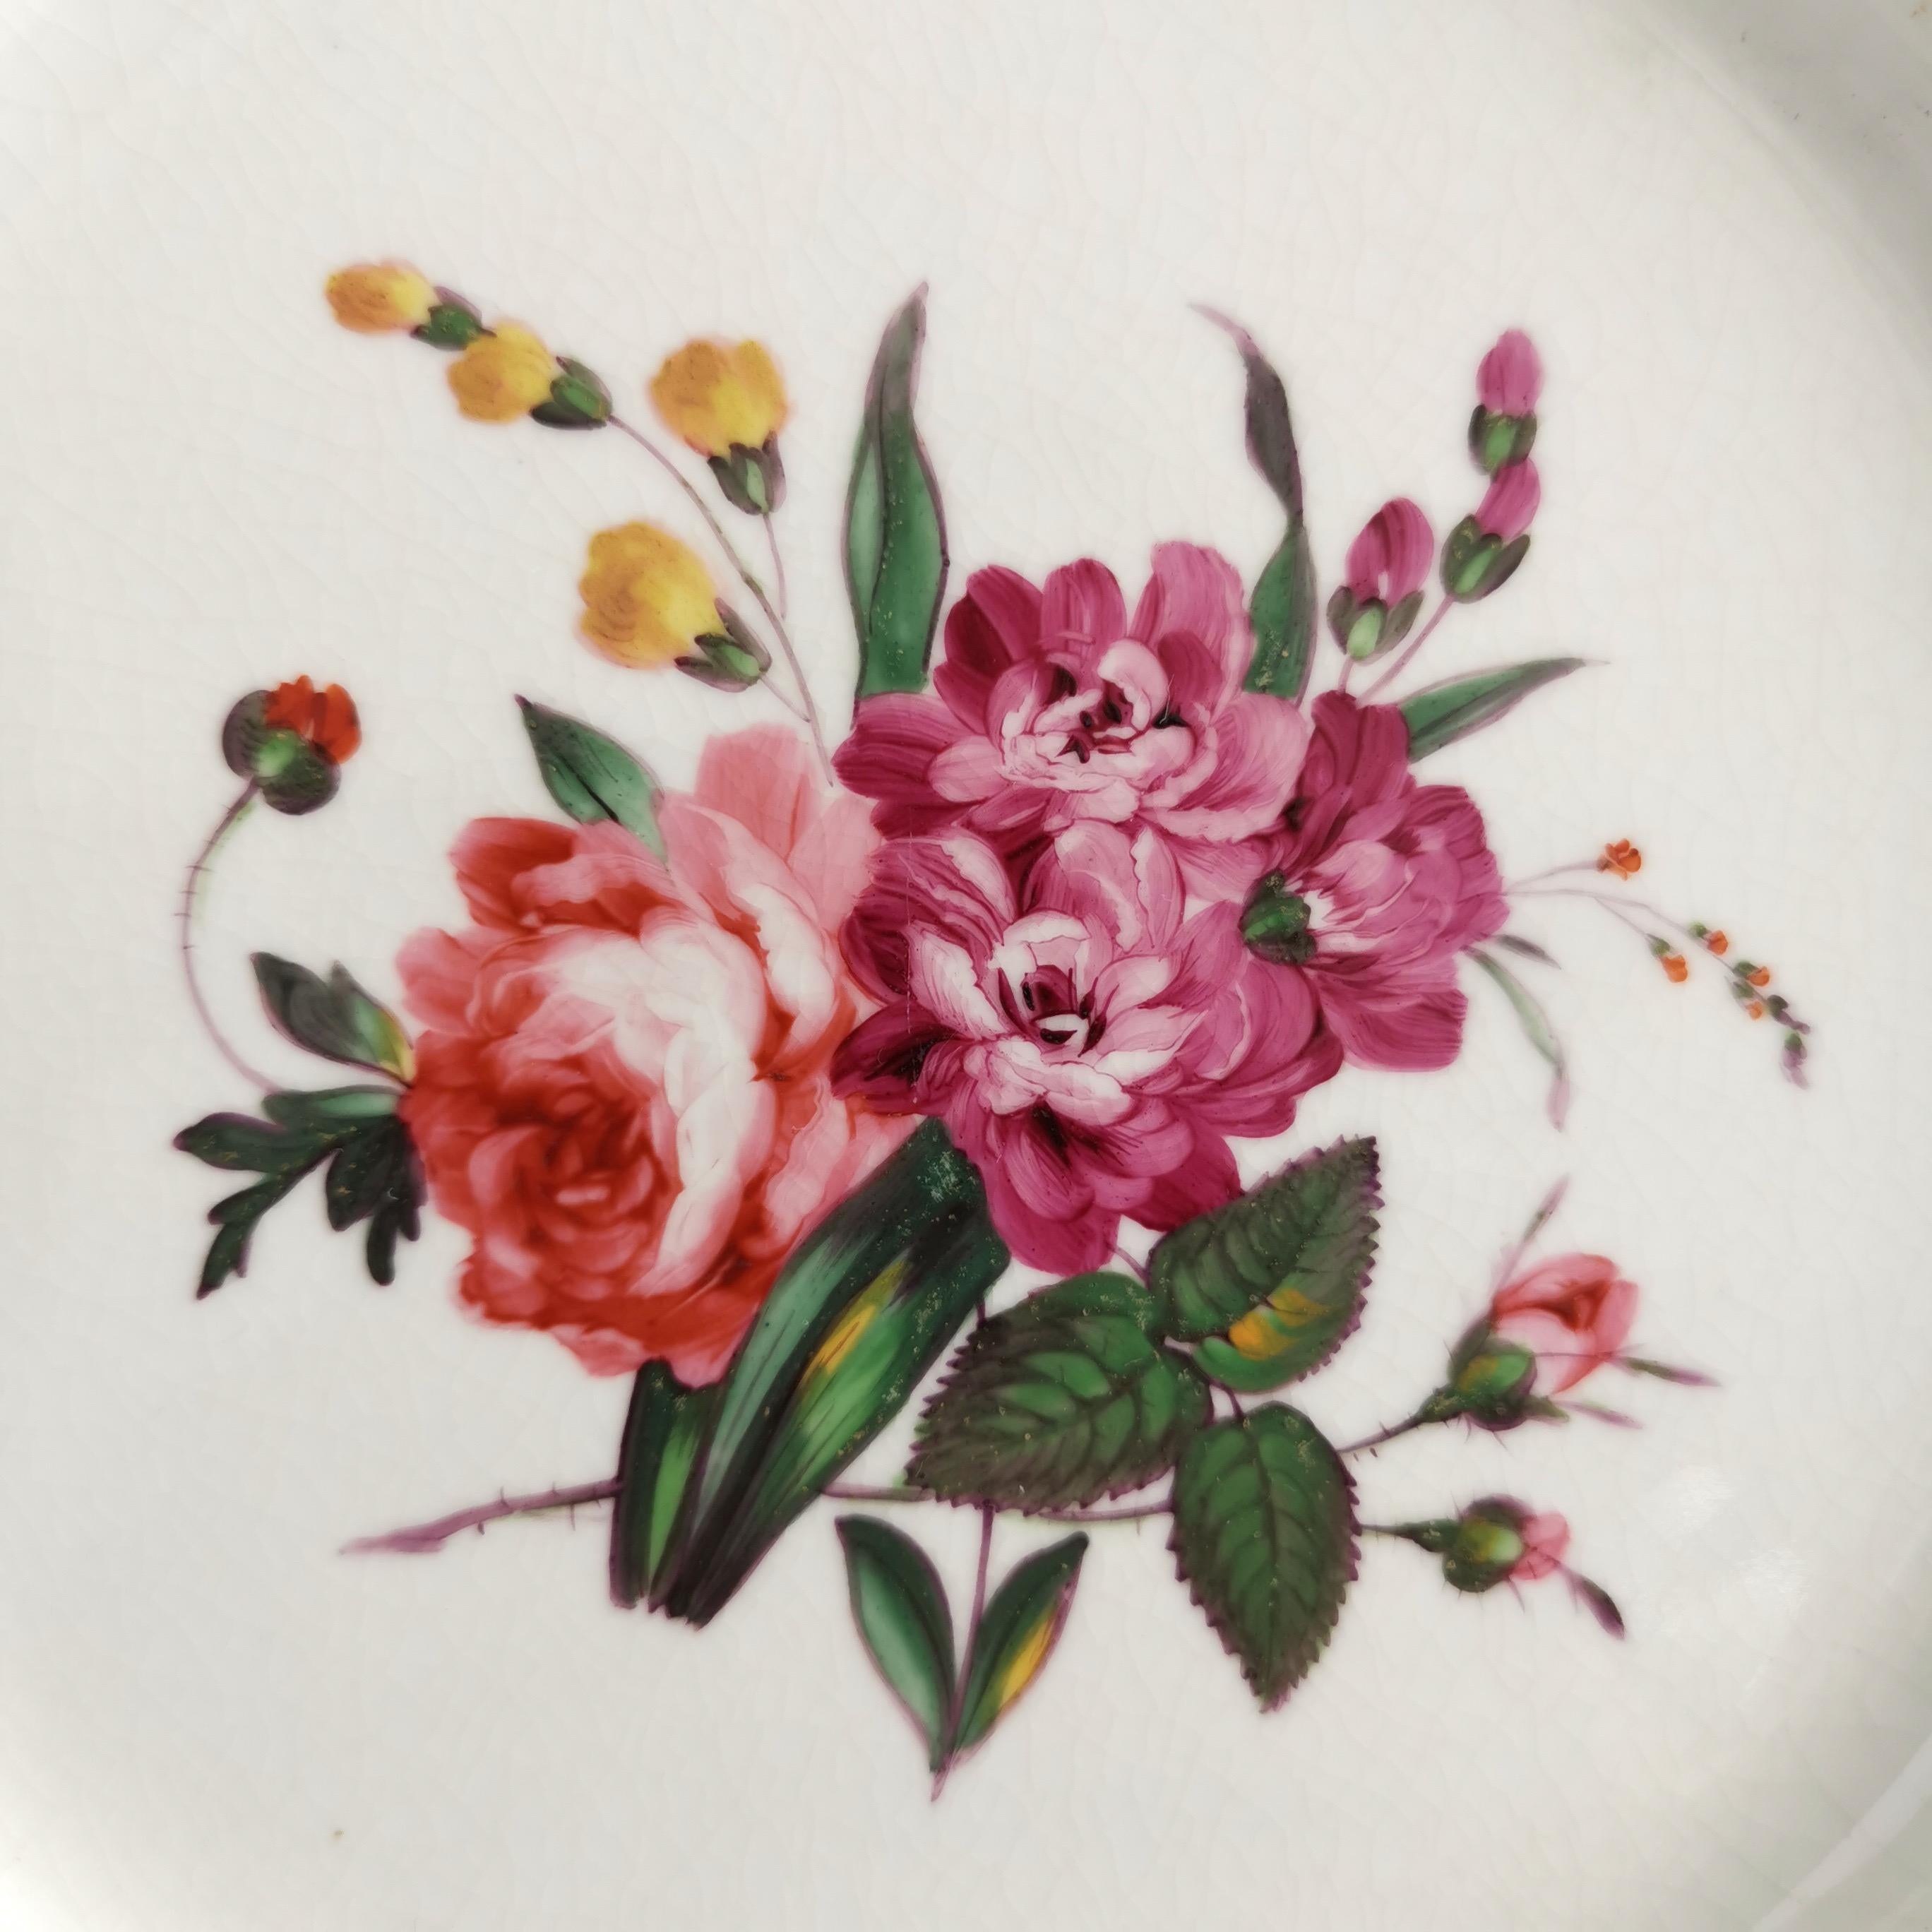 English Porcelain Plate, Chamberlains Worcester, White with Flowers, Regency ca 1822 '2'